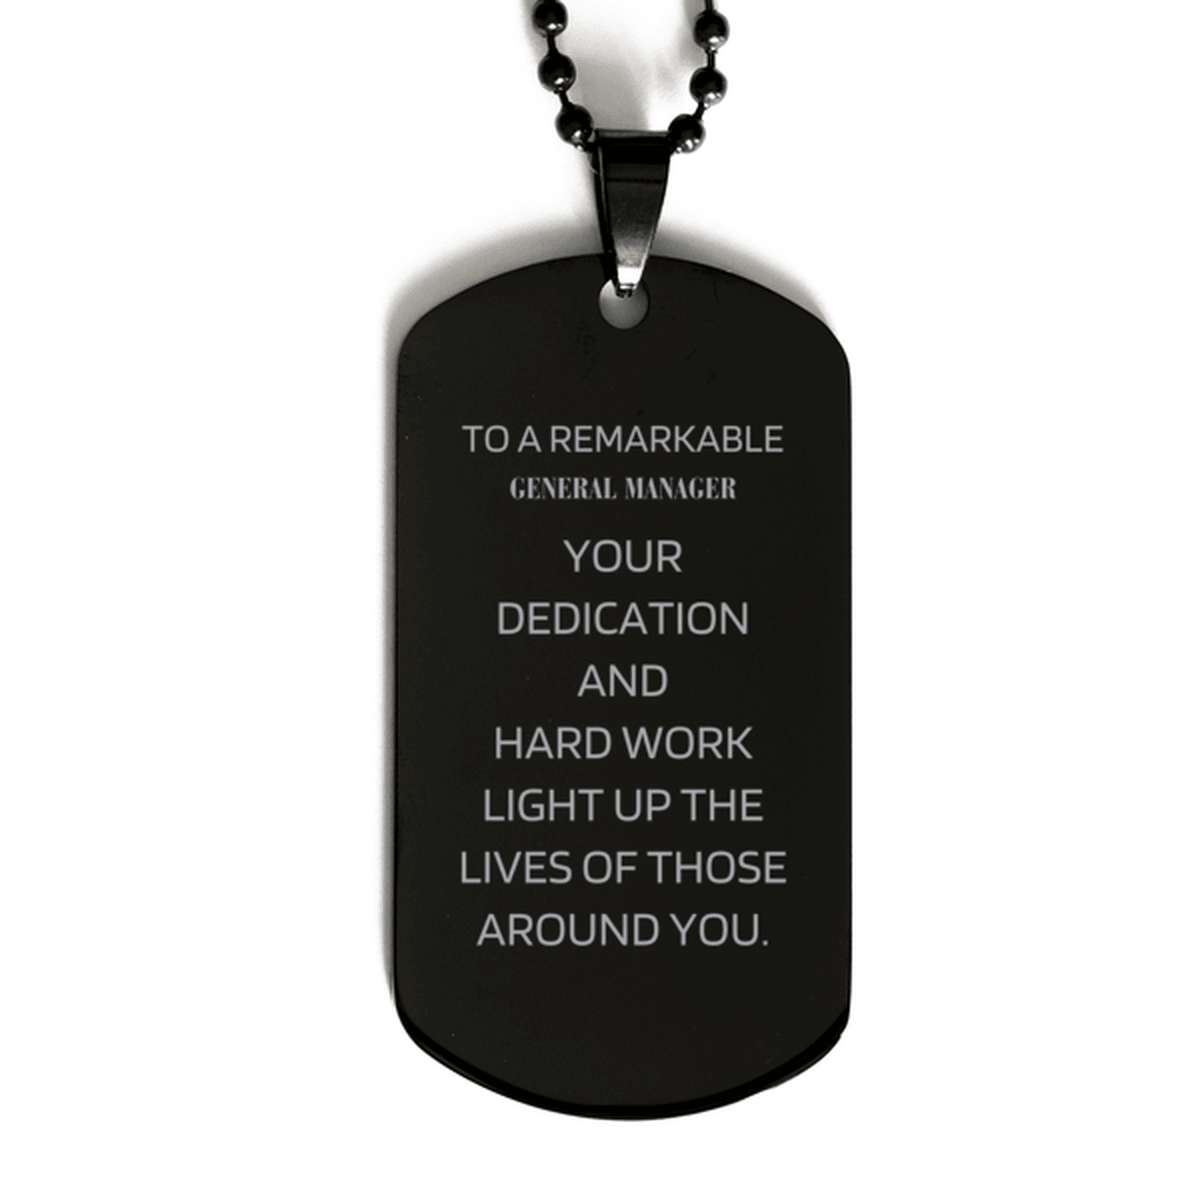 Remarkable General Manager Gifts, Your dedication and hard work, Inspirational Birthday Christmas Unique Black Dog Tag For General Manager, Coworkers, Men, Women, Friends - Mallard Moon Gift Shop